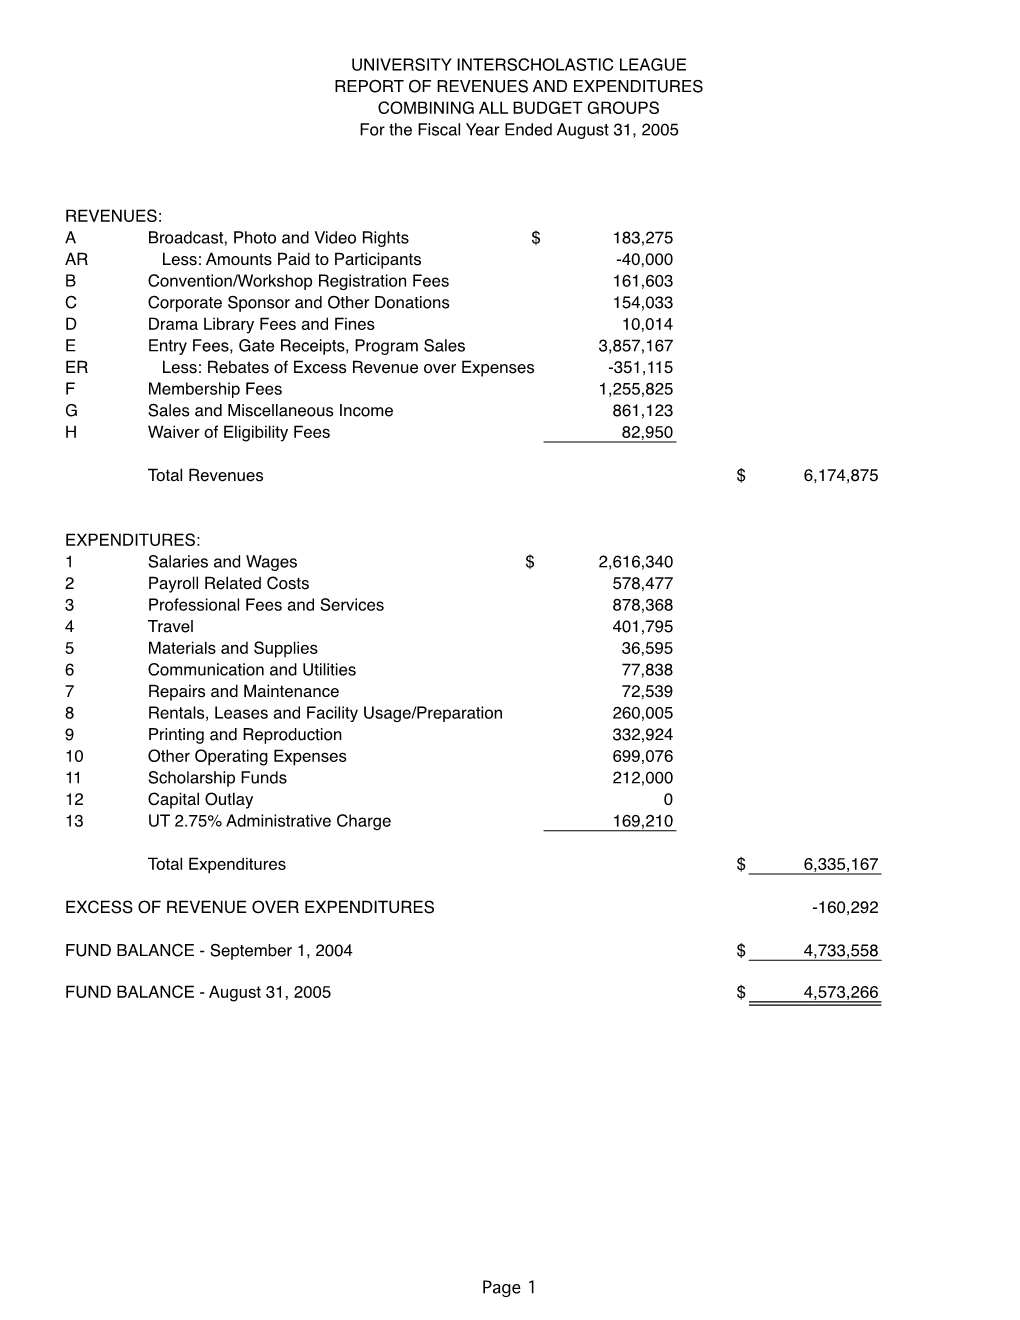 UNIVERSITY INTERSCHOLASTIC LEAGUE REPORT of REVENUES and EXPENDITURES COMBINING ALL BUDGET GROUPS for the Fiscal Year Ended August 31, 2005